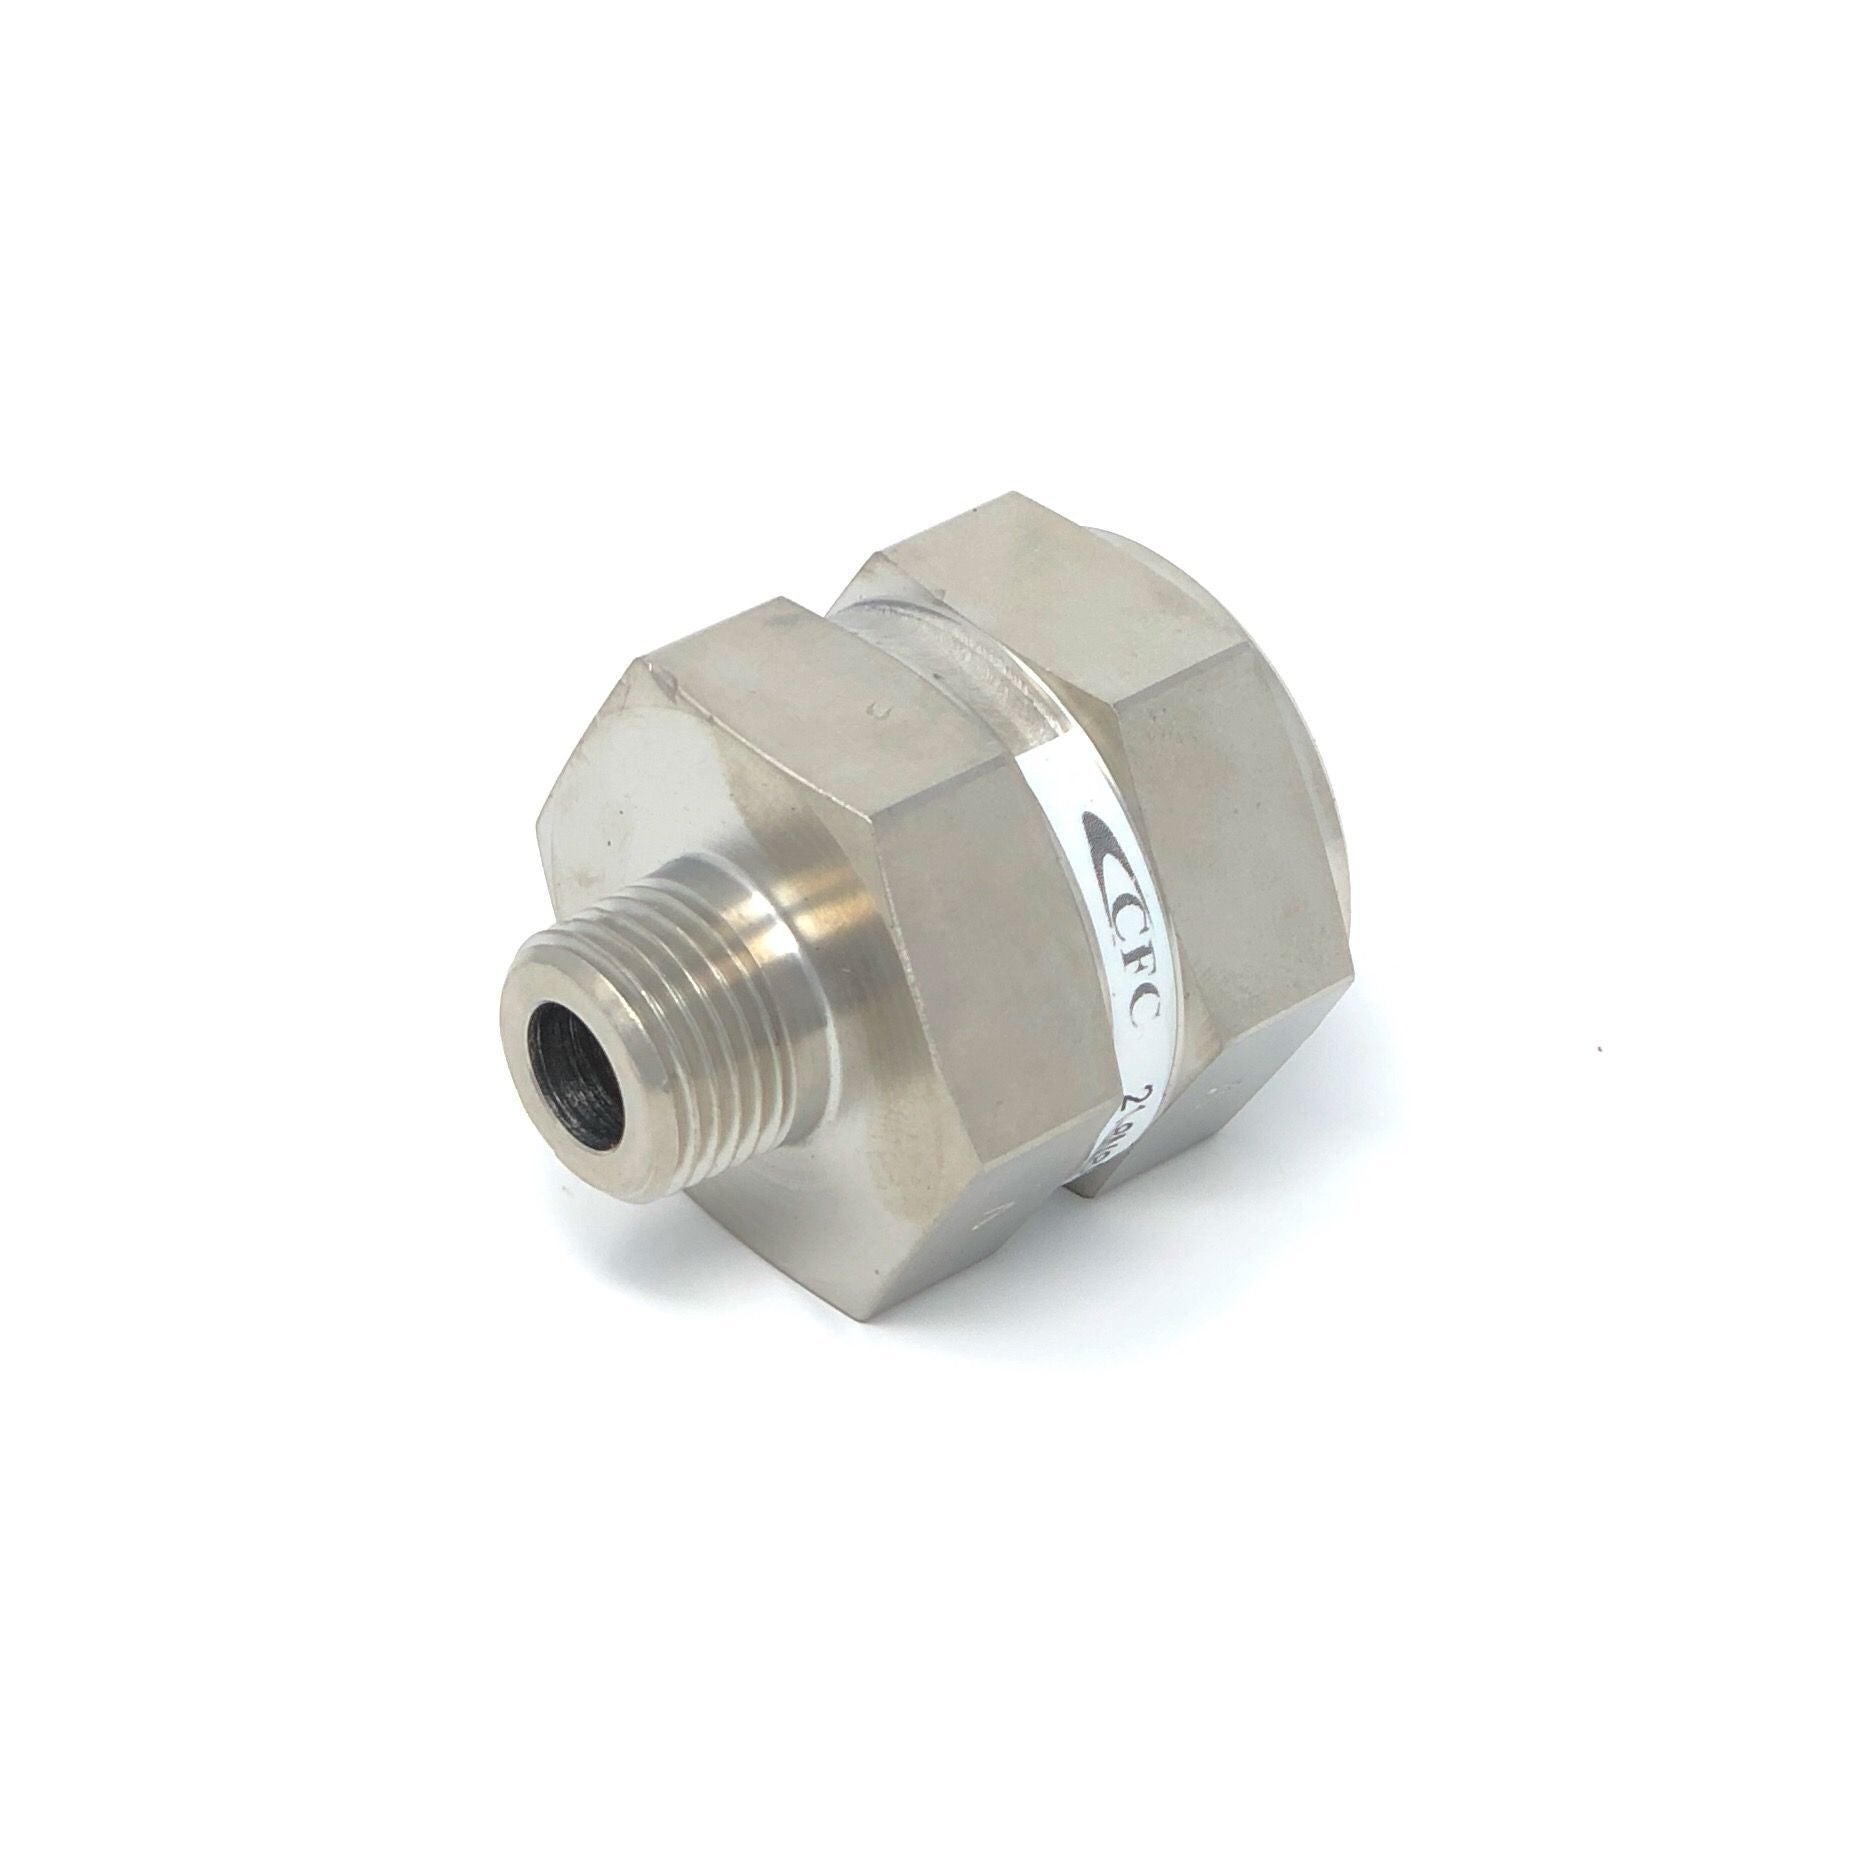 21-4T4T-100S : Chase High Pressure Inline Filter, 6000psi, 1/4" 37 Degree Flare, 100 Micron, No Visual Indicator, No Bypass